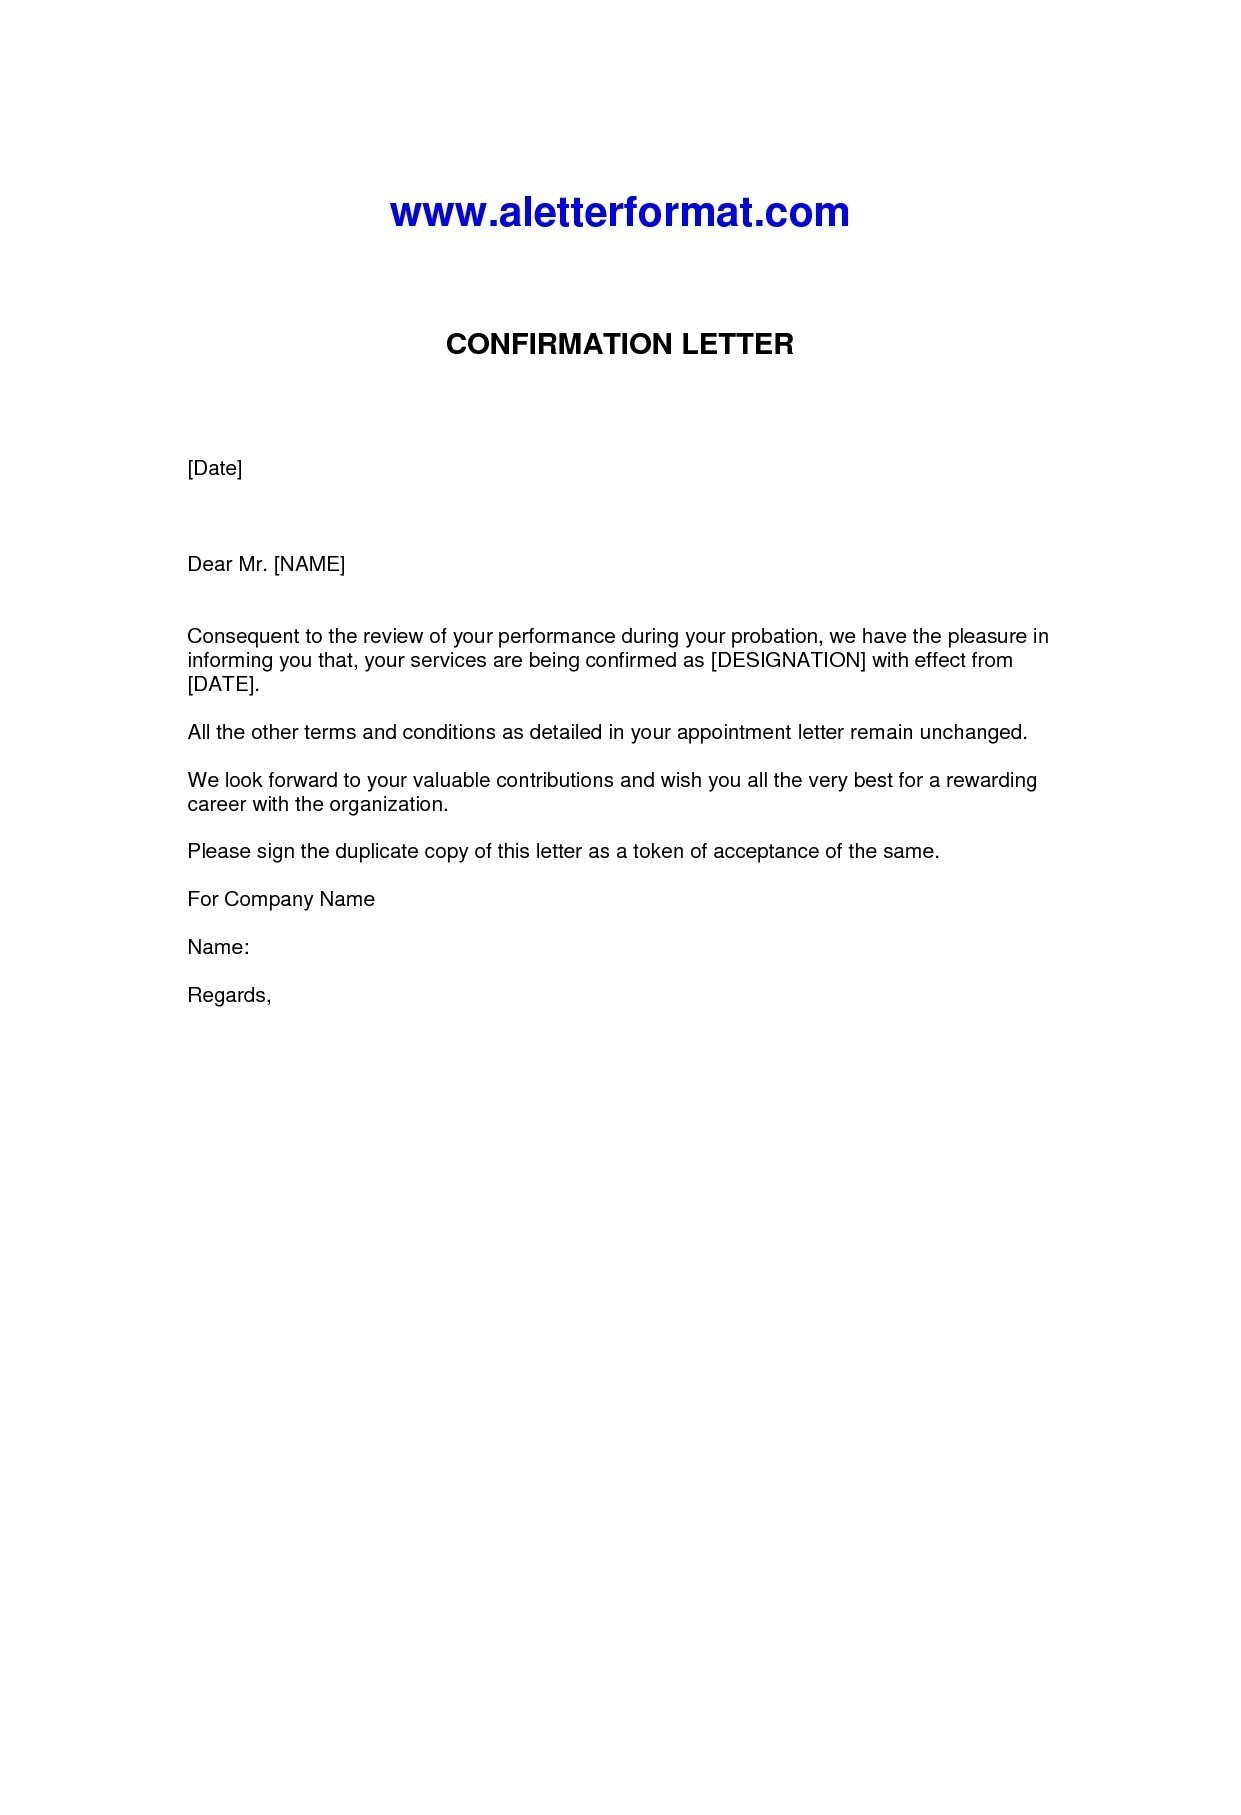 Employment Confirmation Letter Template Doc - Job Confirmation Sample Letters Fresh Request for Job Confirmation